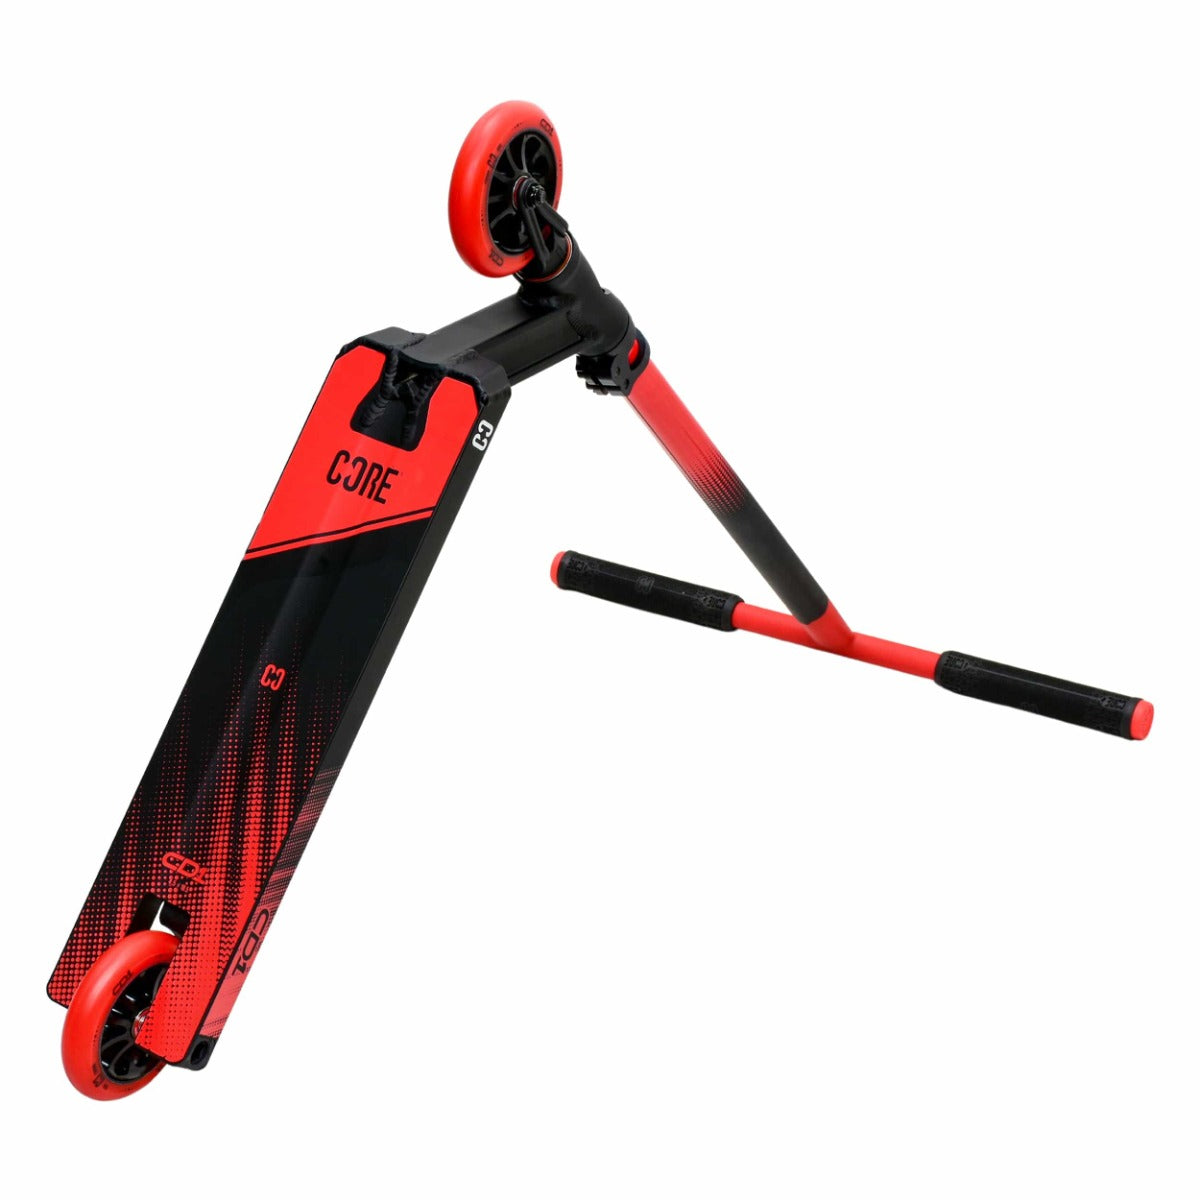 CORE CD1 Complete Stunt Scooter - Red / Black - Deck Angle